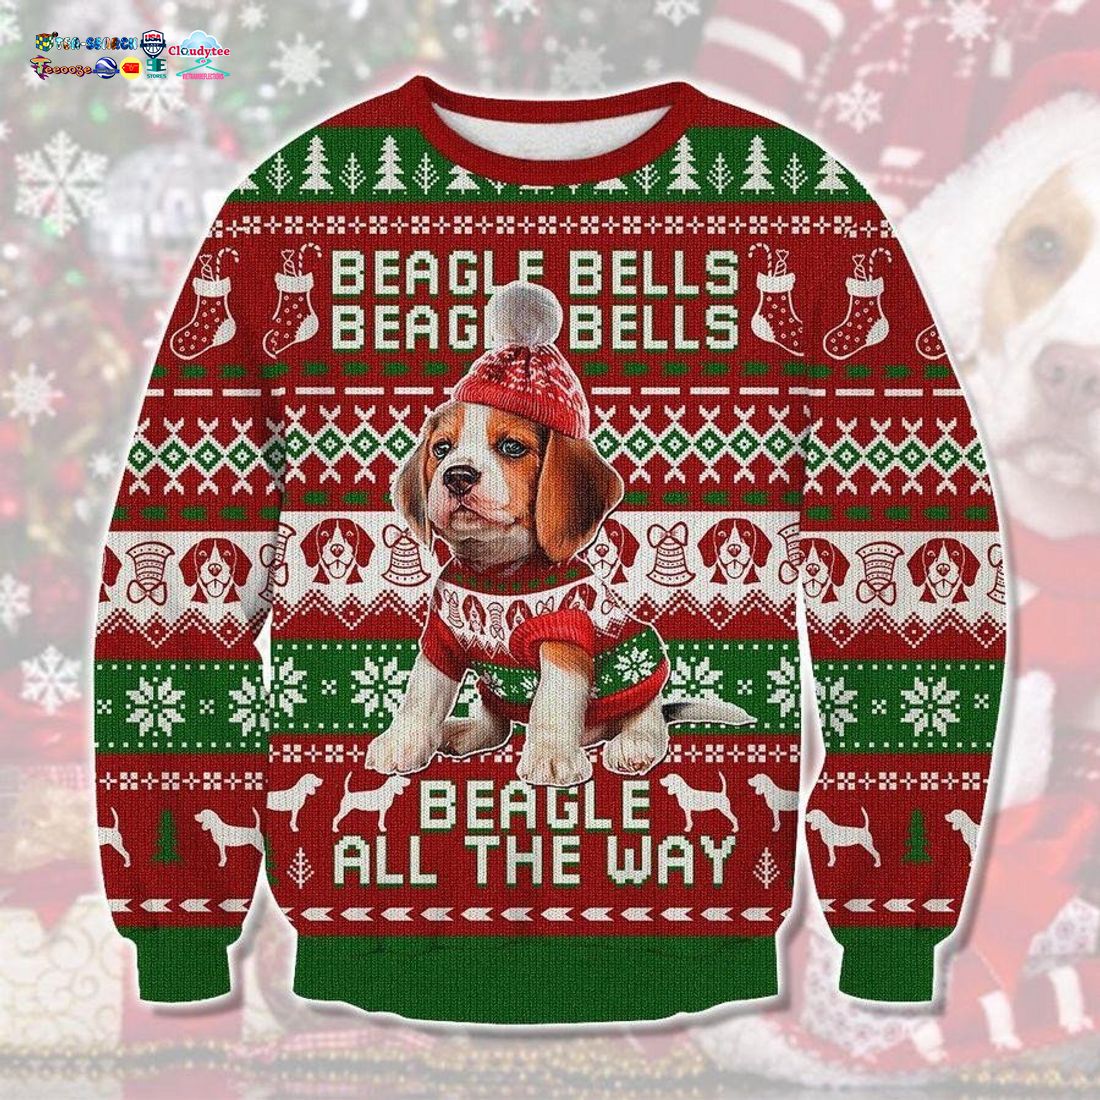 Beagle Bell Beagle Bell Beagle all The Way Ugly Christmas Sweater